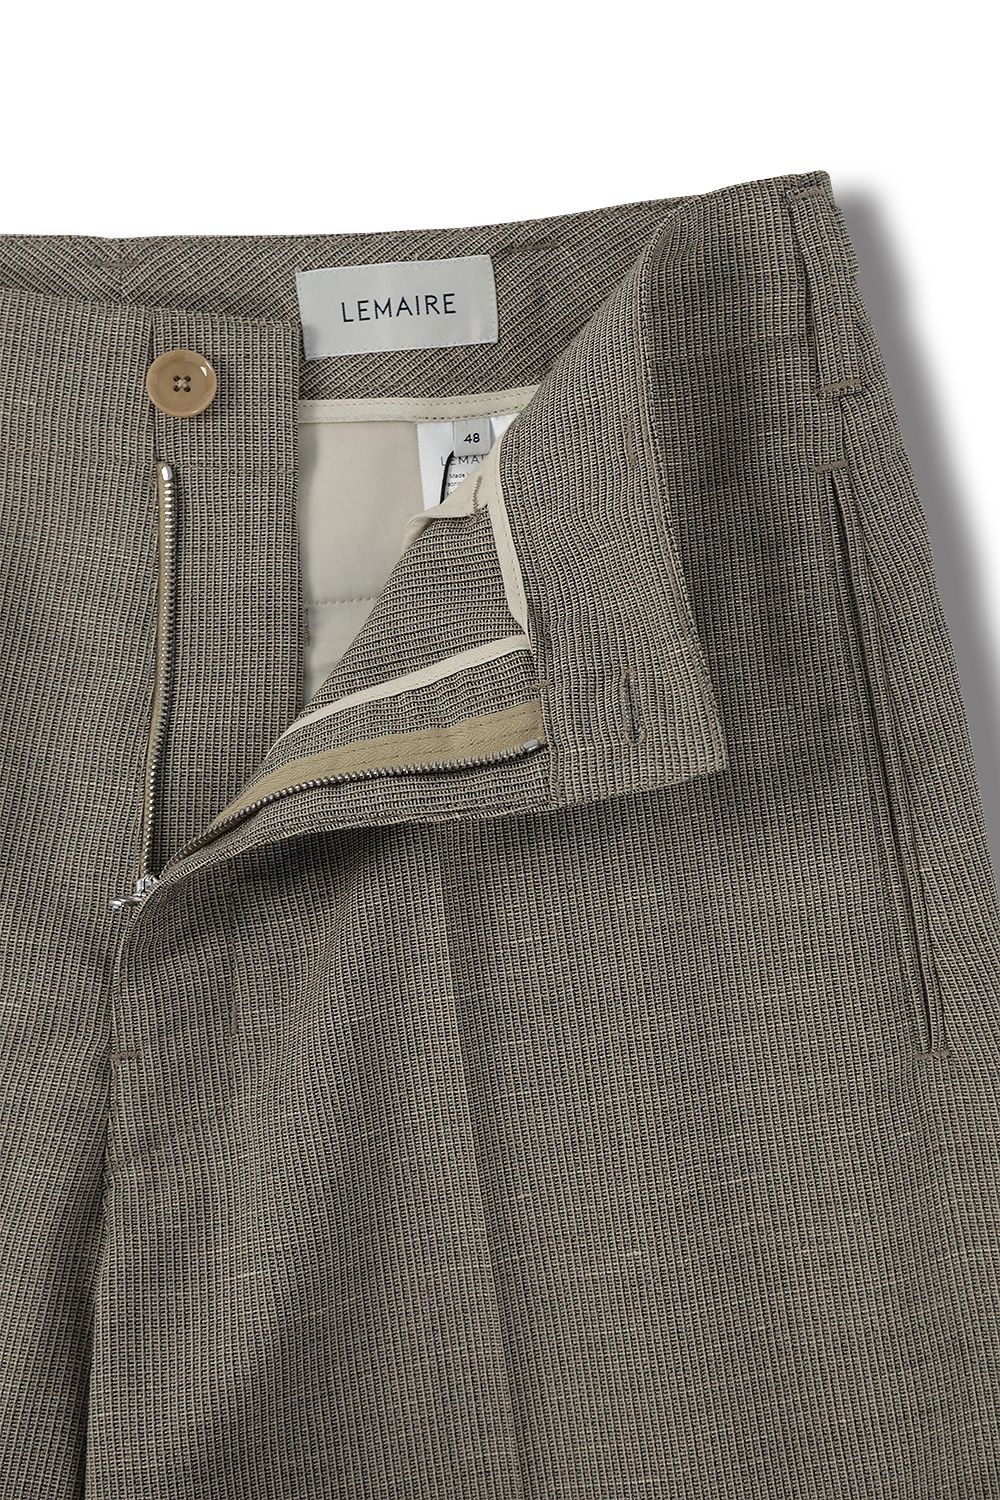 LEMAIRE - 【ラスト1点】TAPERED PANTS(BEIGE/GREY) | Acacia ONLINESTORE